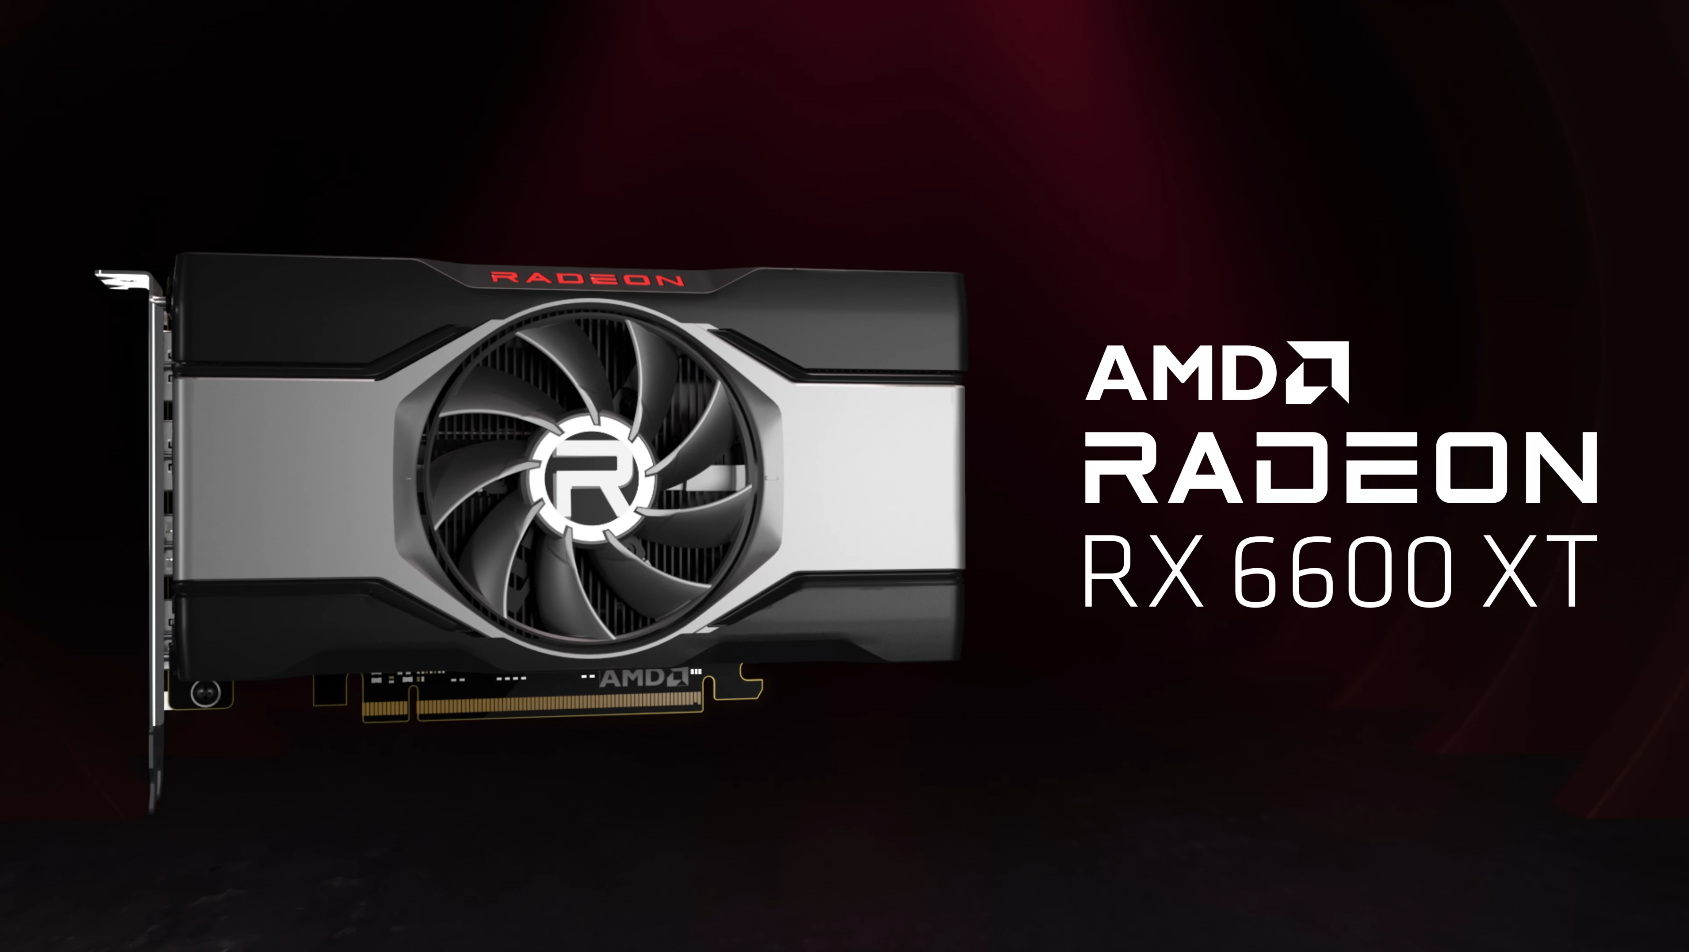 Air-Cooled AMD Radeon RX 6600 XT Overclocked to 2.8 GHz